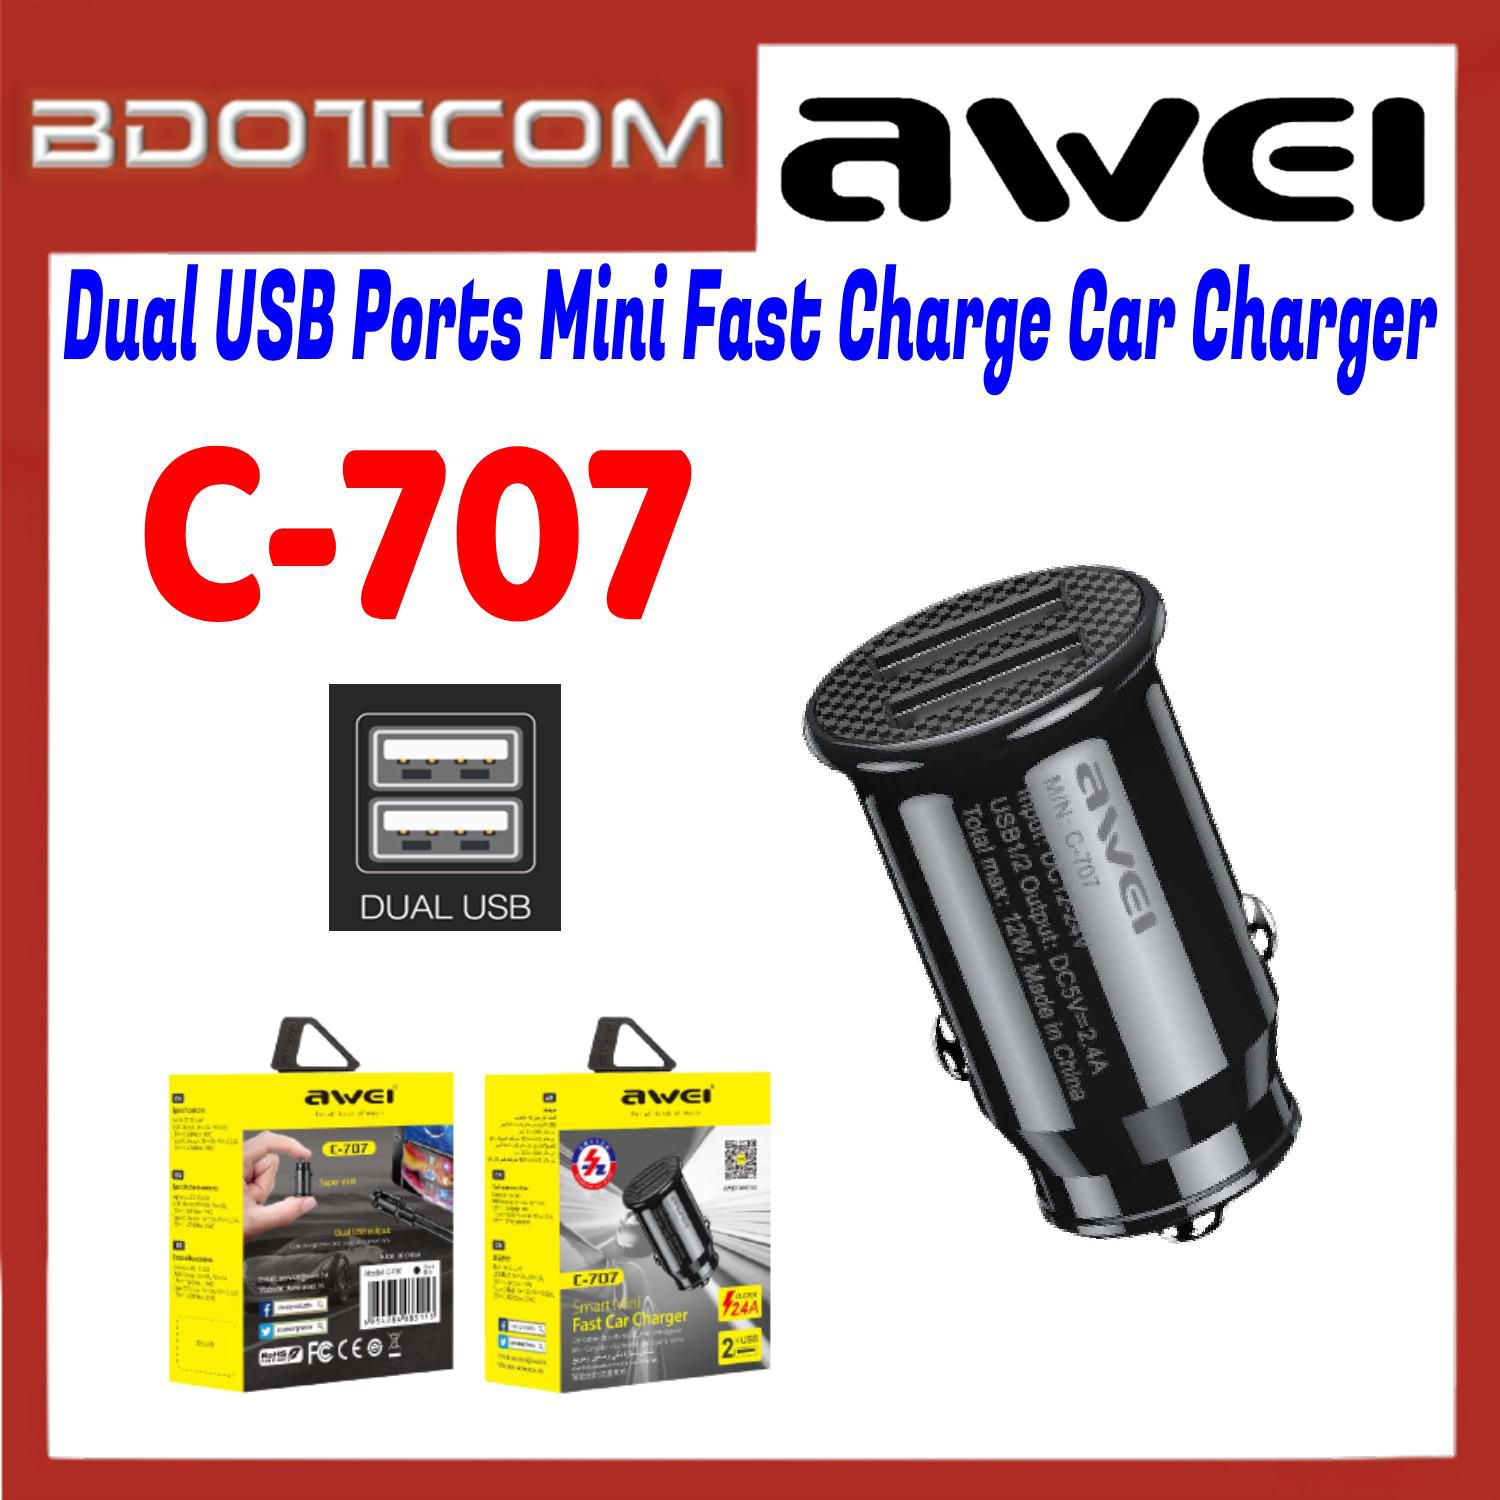 Awei C-707 2.4A Dual USB Ports Smart Mini Fast Charge Car Charger for Samsung